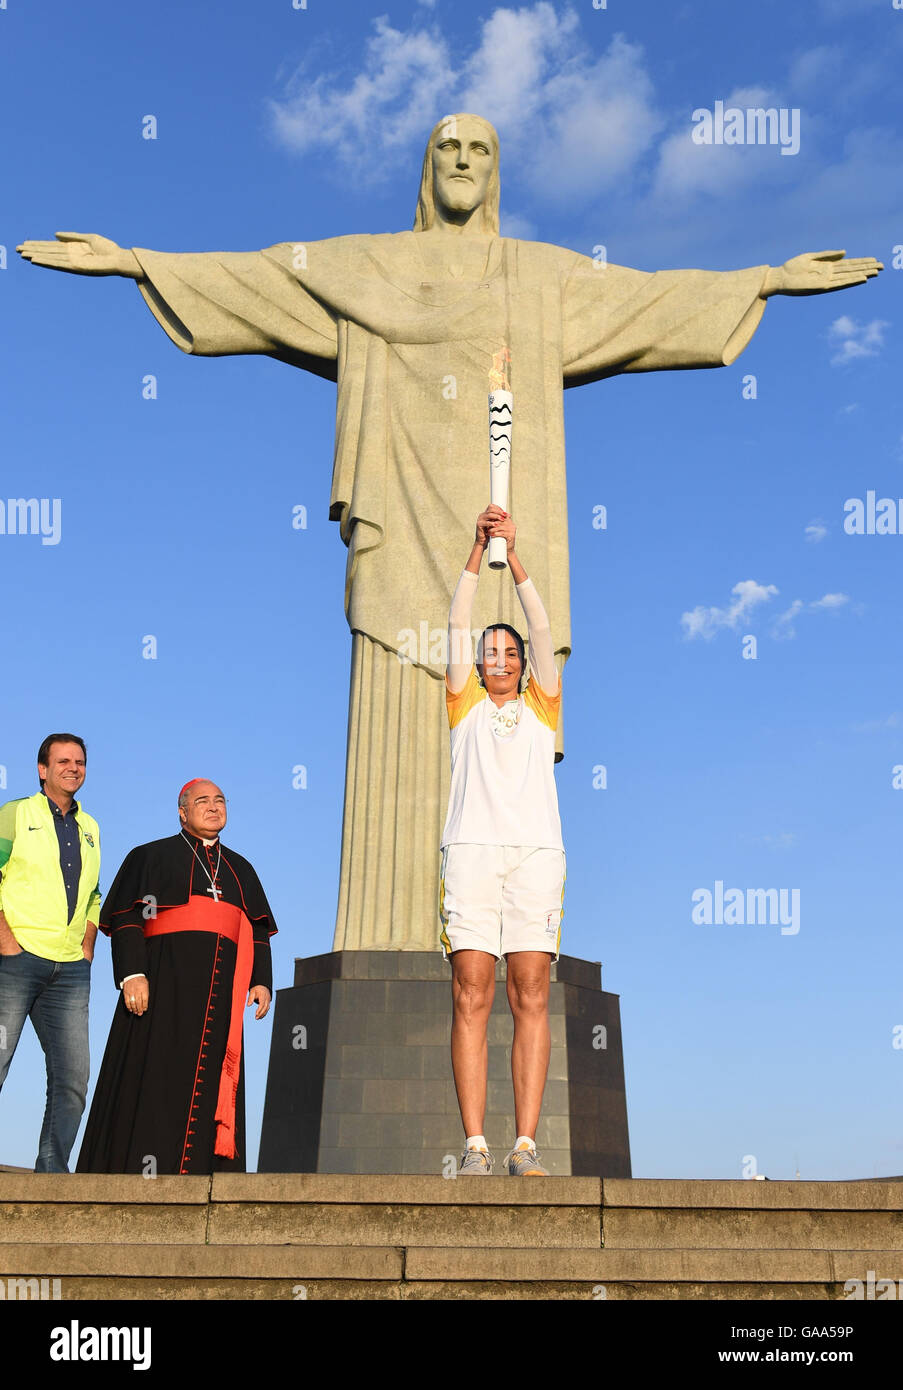 Rio de Janeiro, Brazil. 5th Aug, 2016. Brazilian former volleyball player Maria Isabel Barroso holds the Olympic torch next to Eduardo Paes (L), Mayor of Rio de Janeiro, and Archbishop of Rio de Janeiro, Orani Joao Tempesta (2-L), during the Olympic Torch Relay in front of Christ the Redeemer statue early in the morning prior to the Rio 2016 Olympic Games in Rio de Janeiro, Brazil, 5 August 2016. Rio 2016 Olympic Games take place from 05 to 21 August. Photo: Sebastian Kahnert/dpa/Alamy Live News Stock Photo